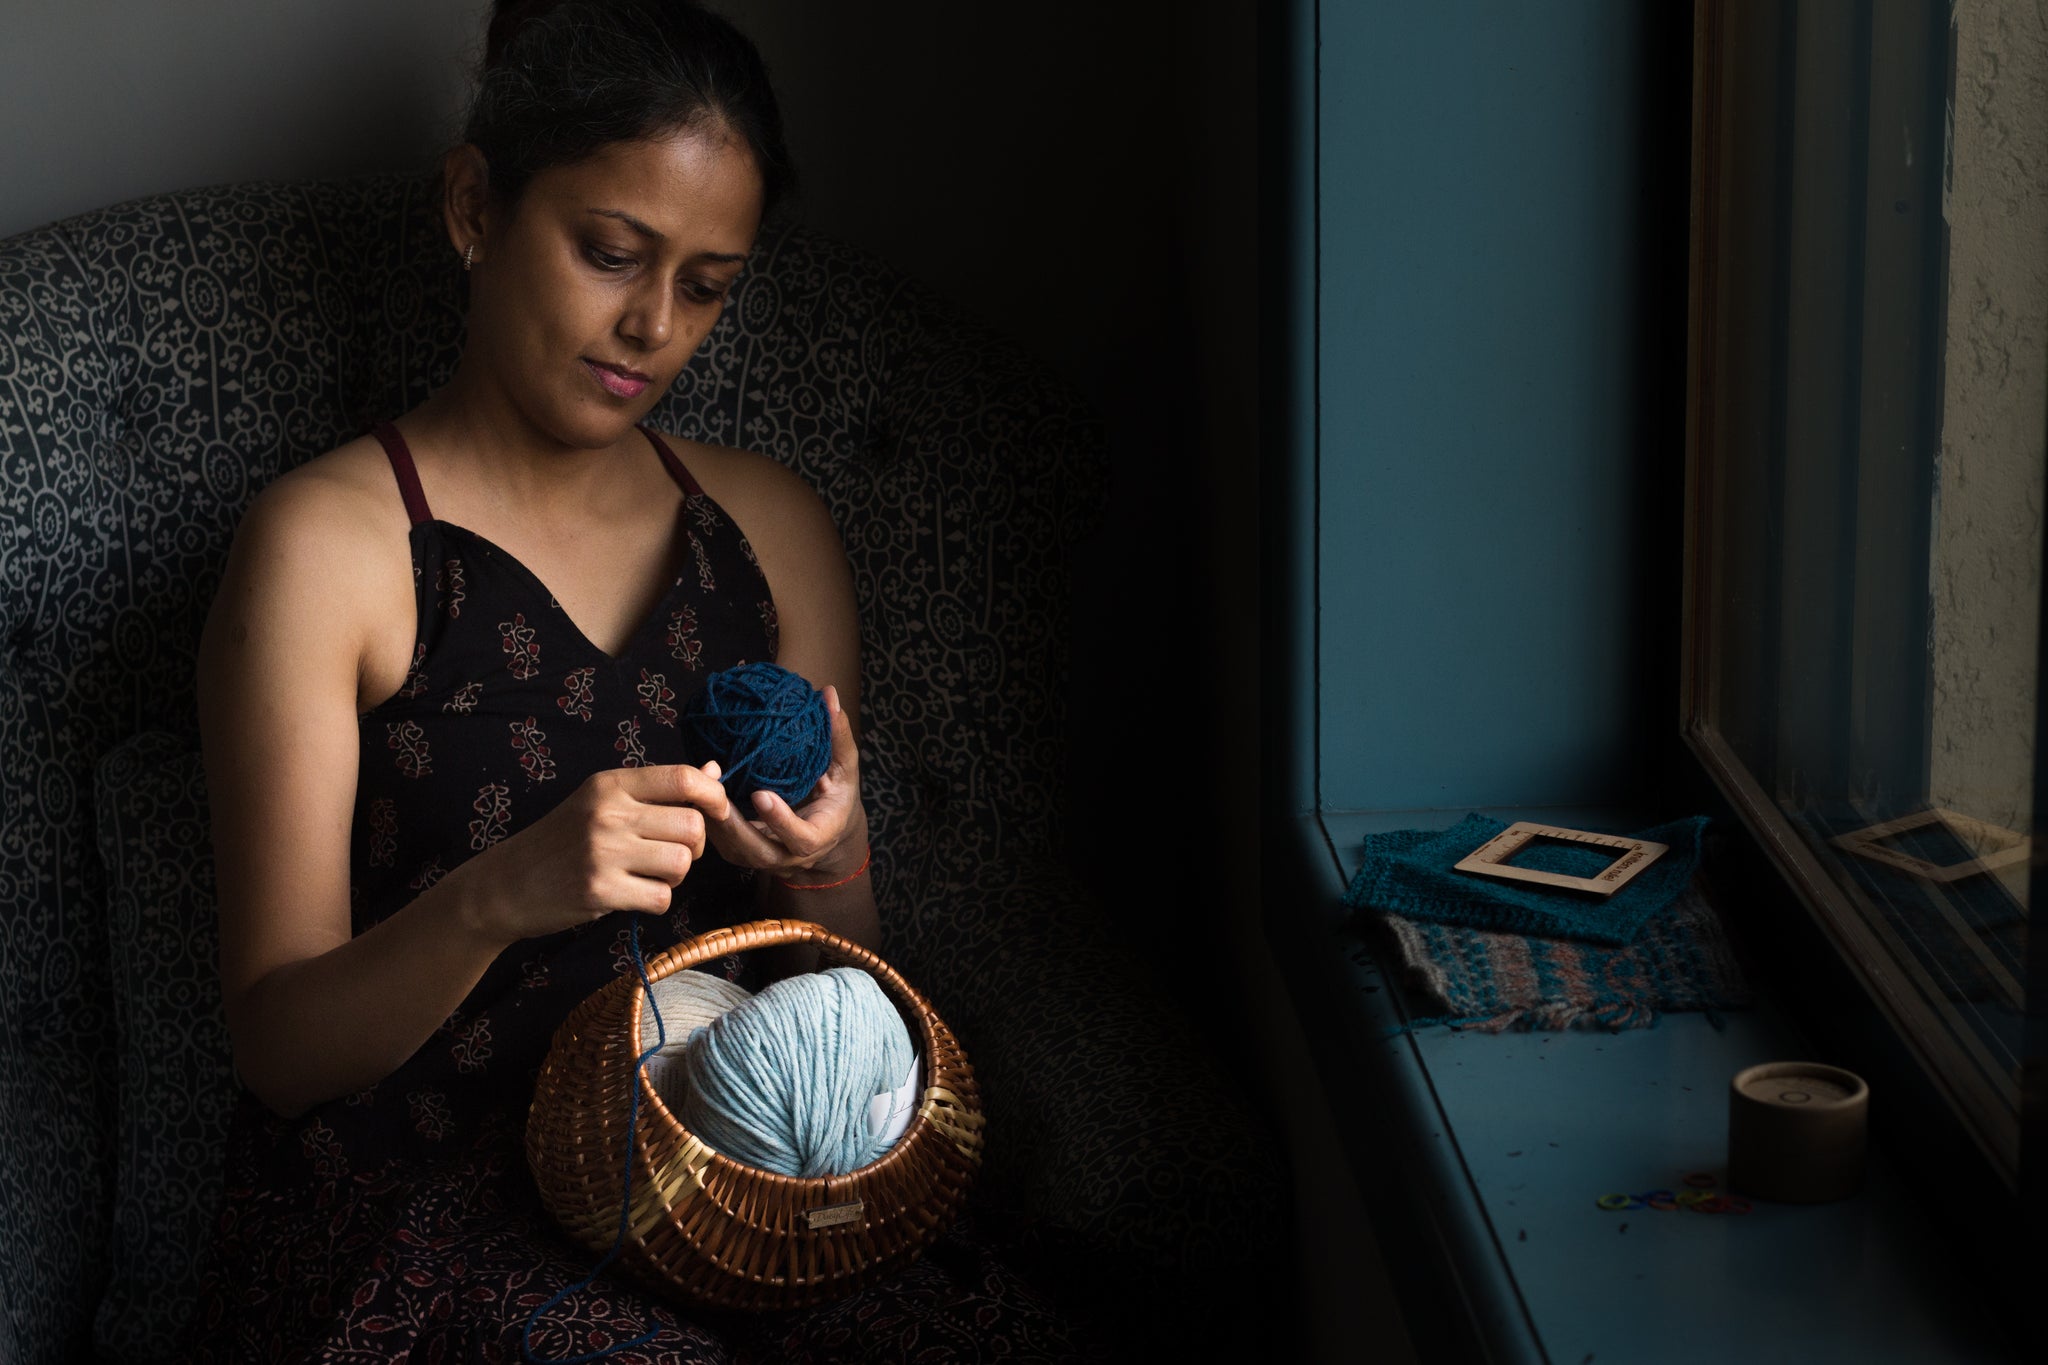 a women sits by a window against a dark wall, wearing a black dress. She is hand winding a ball of pale blue yarn, and there are swatches of knitting next to her on the windowsill.